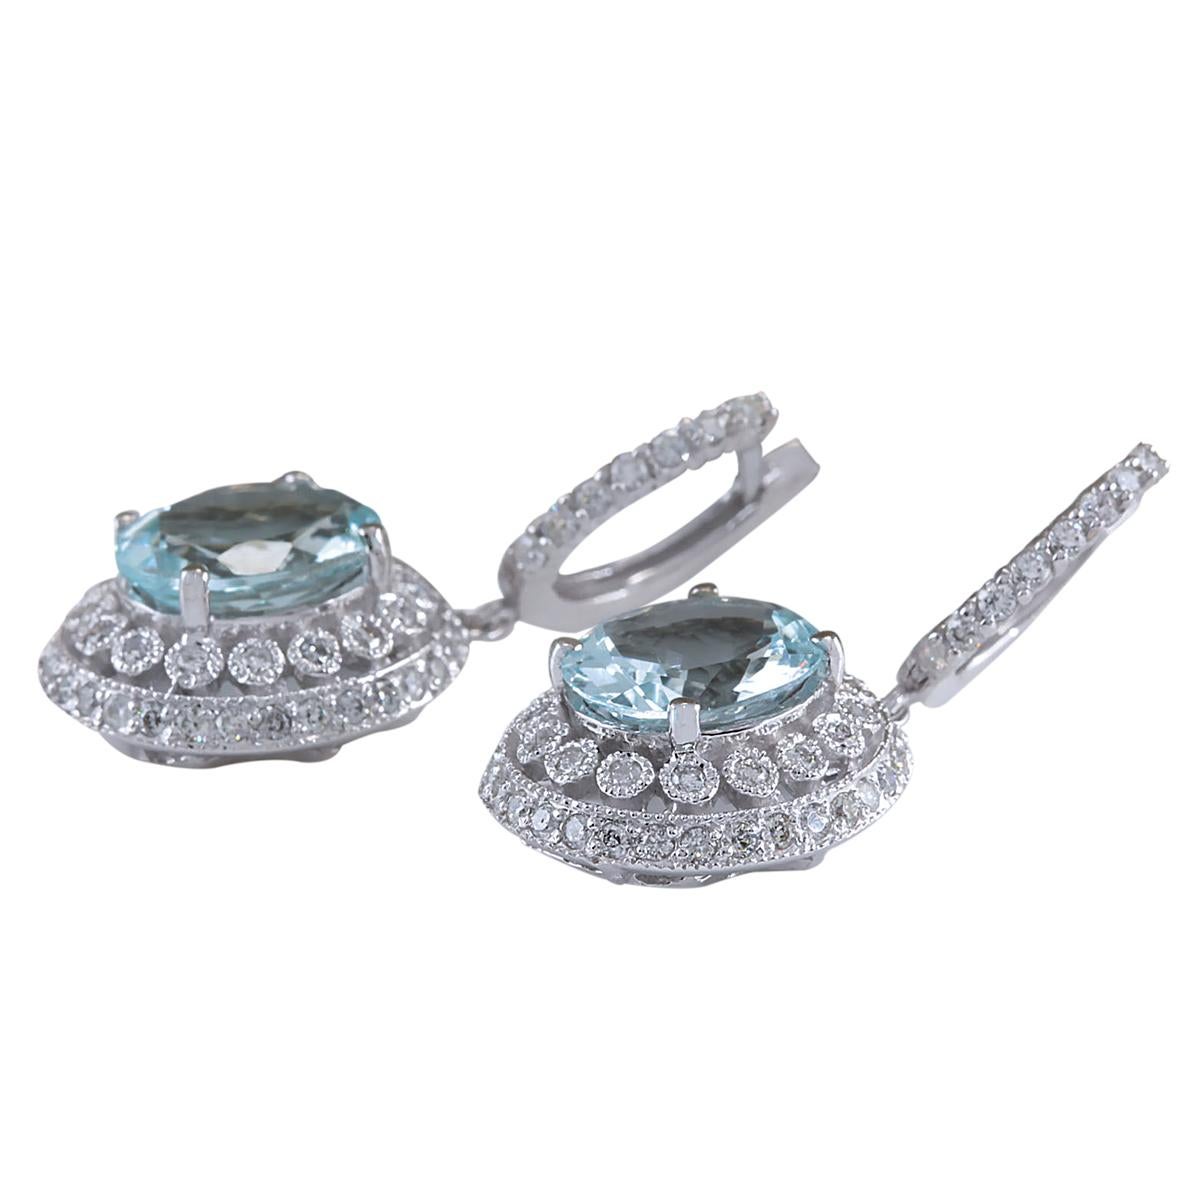 7.34 Carat Natural Aquamarine 14 Karat White Gold Diamond Earrings
Stamped: 14K 
White Gold
Total Earrings Weight: 8.9 Grams
Earrings Length: 1.30 Inches
Total Natural Aquamarine Weight is 5.34 Carat (Measures: 11.00x9.00 mm)
Color: Blue
Treatment: